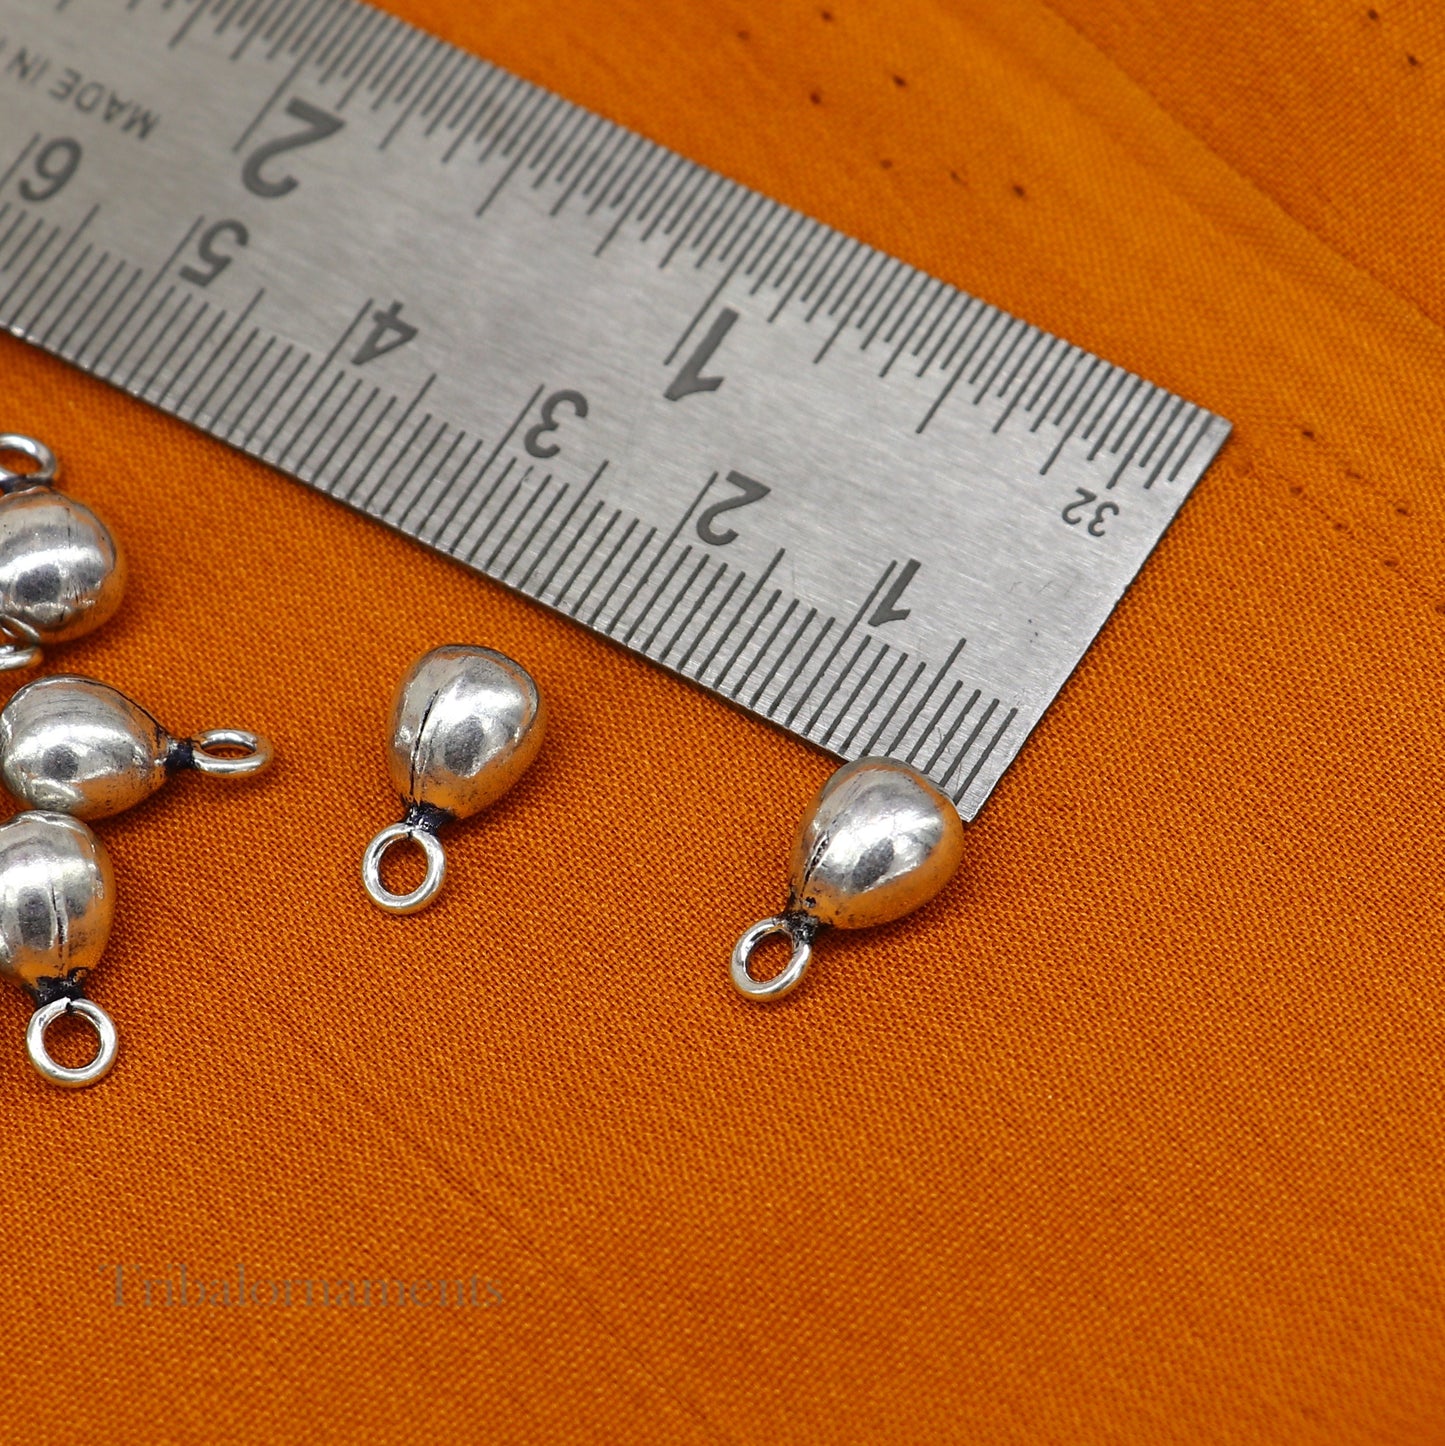 loose beads Lot 20 pieces vintage plain style handmade 925 sterling silver beads or hanging drops for custom jewelry making ideas bd11 - TRIBAL ORNAMENTS